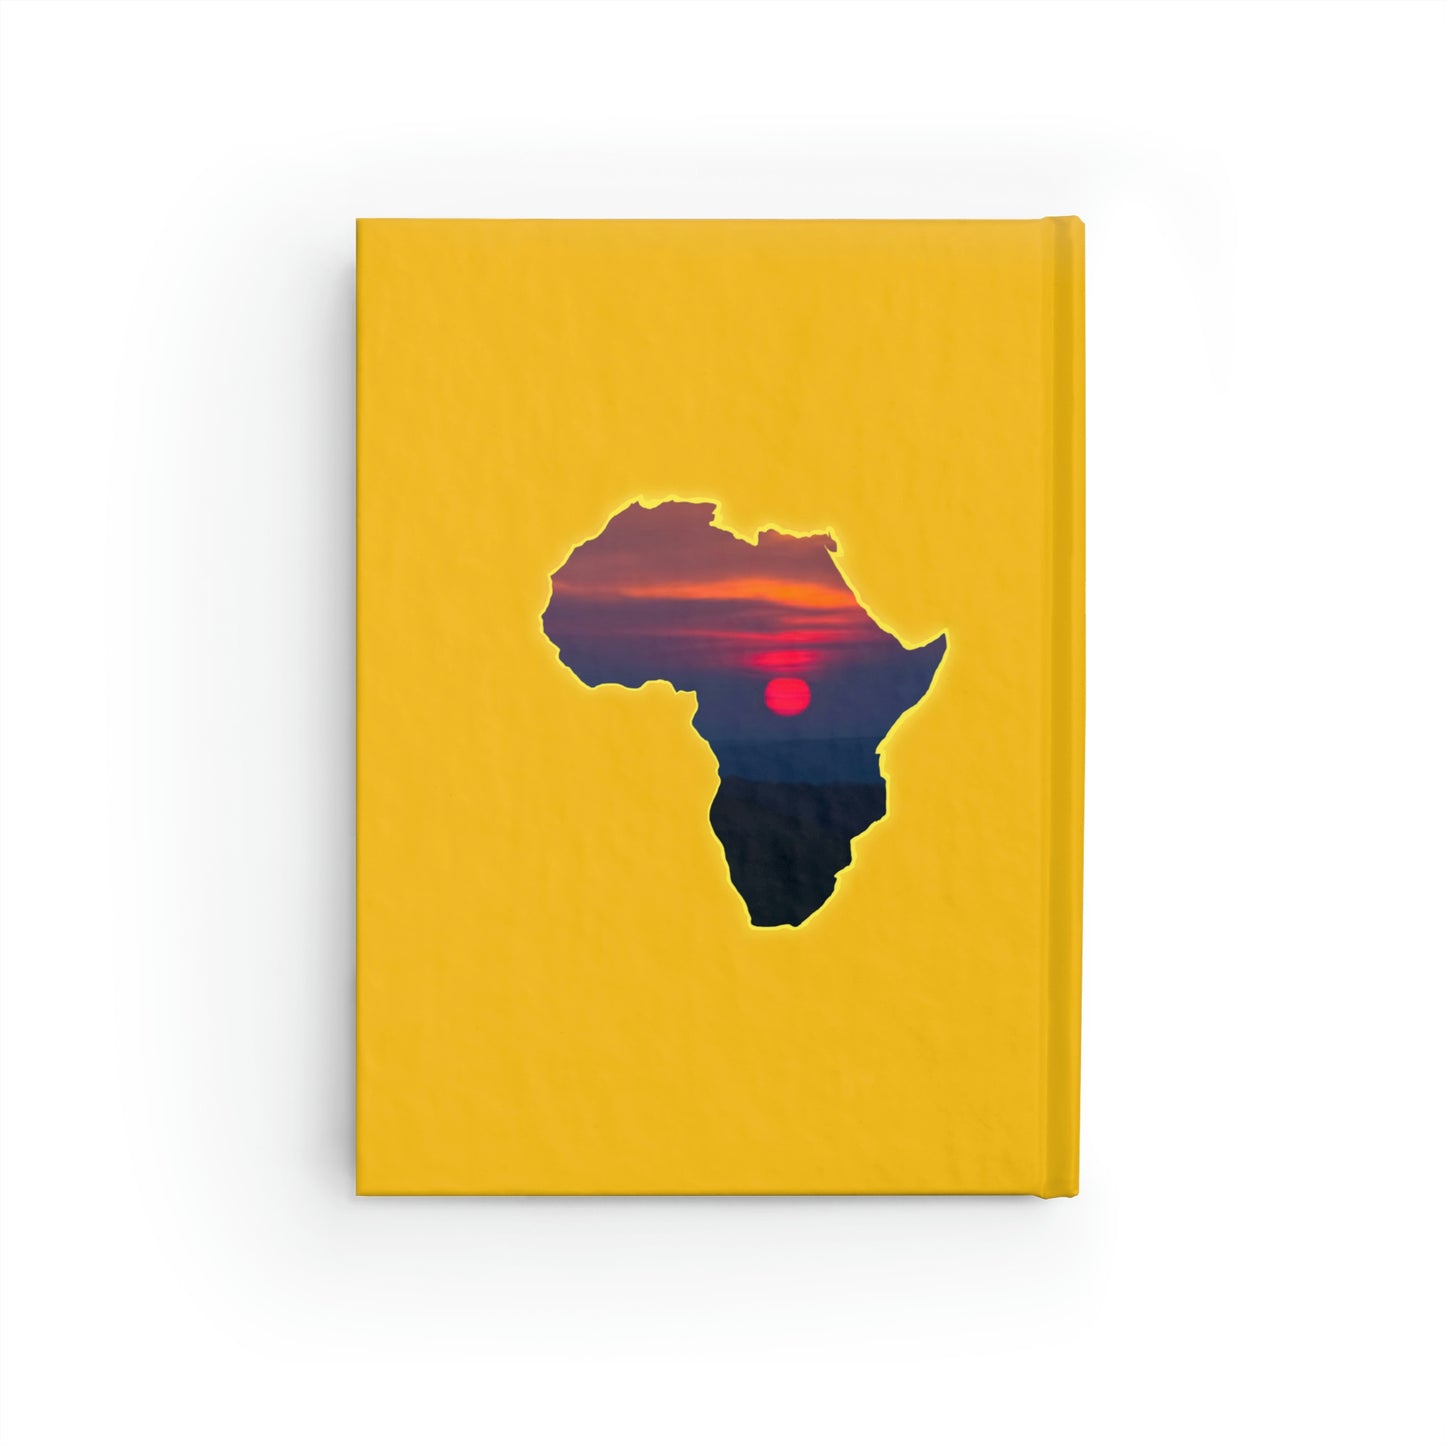 AFRICA Journal Hardcover - Ruled Line - Yellow Cover